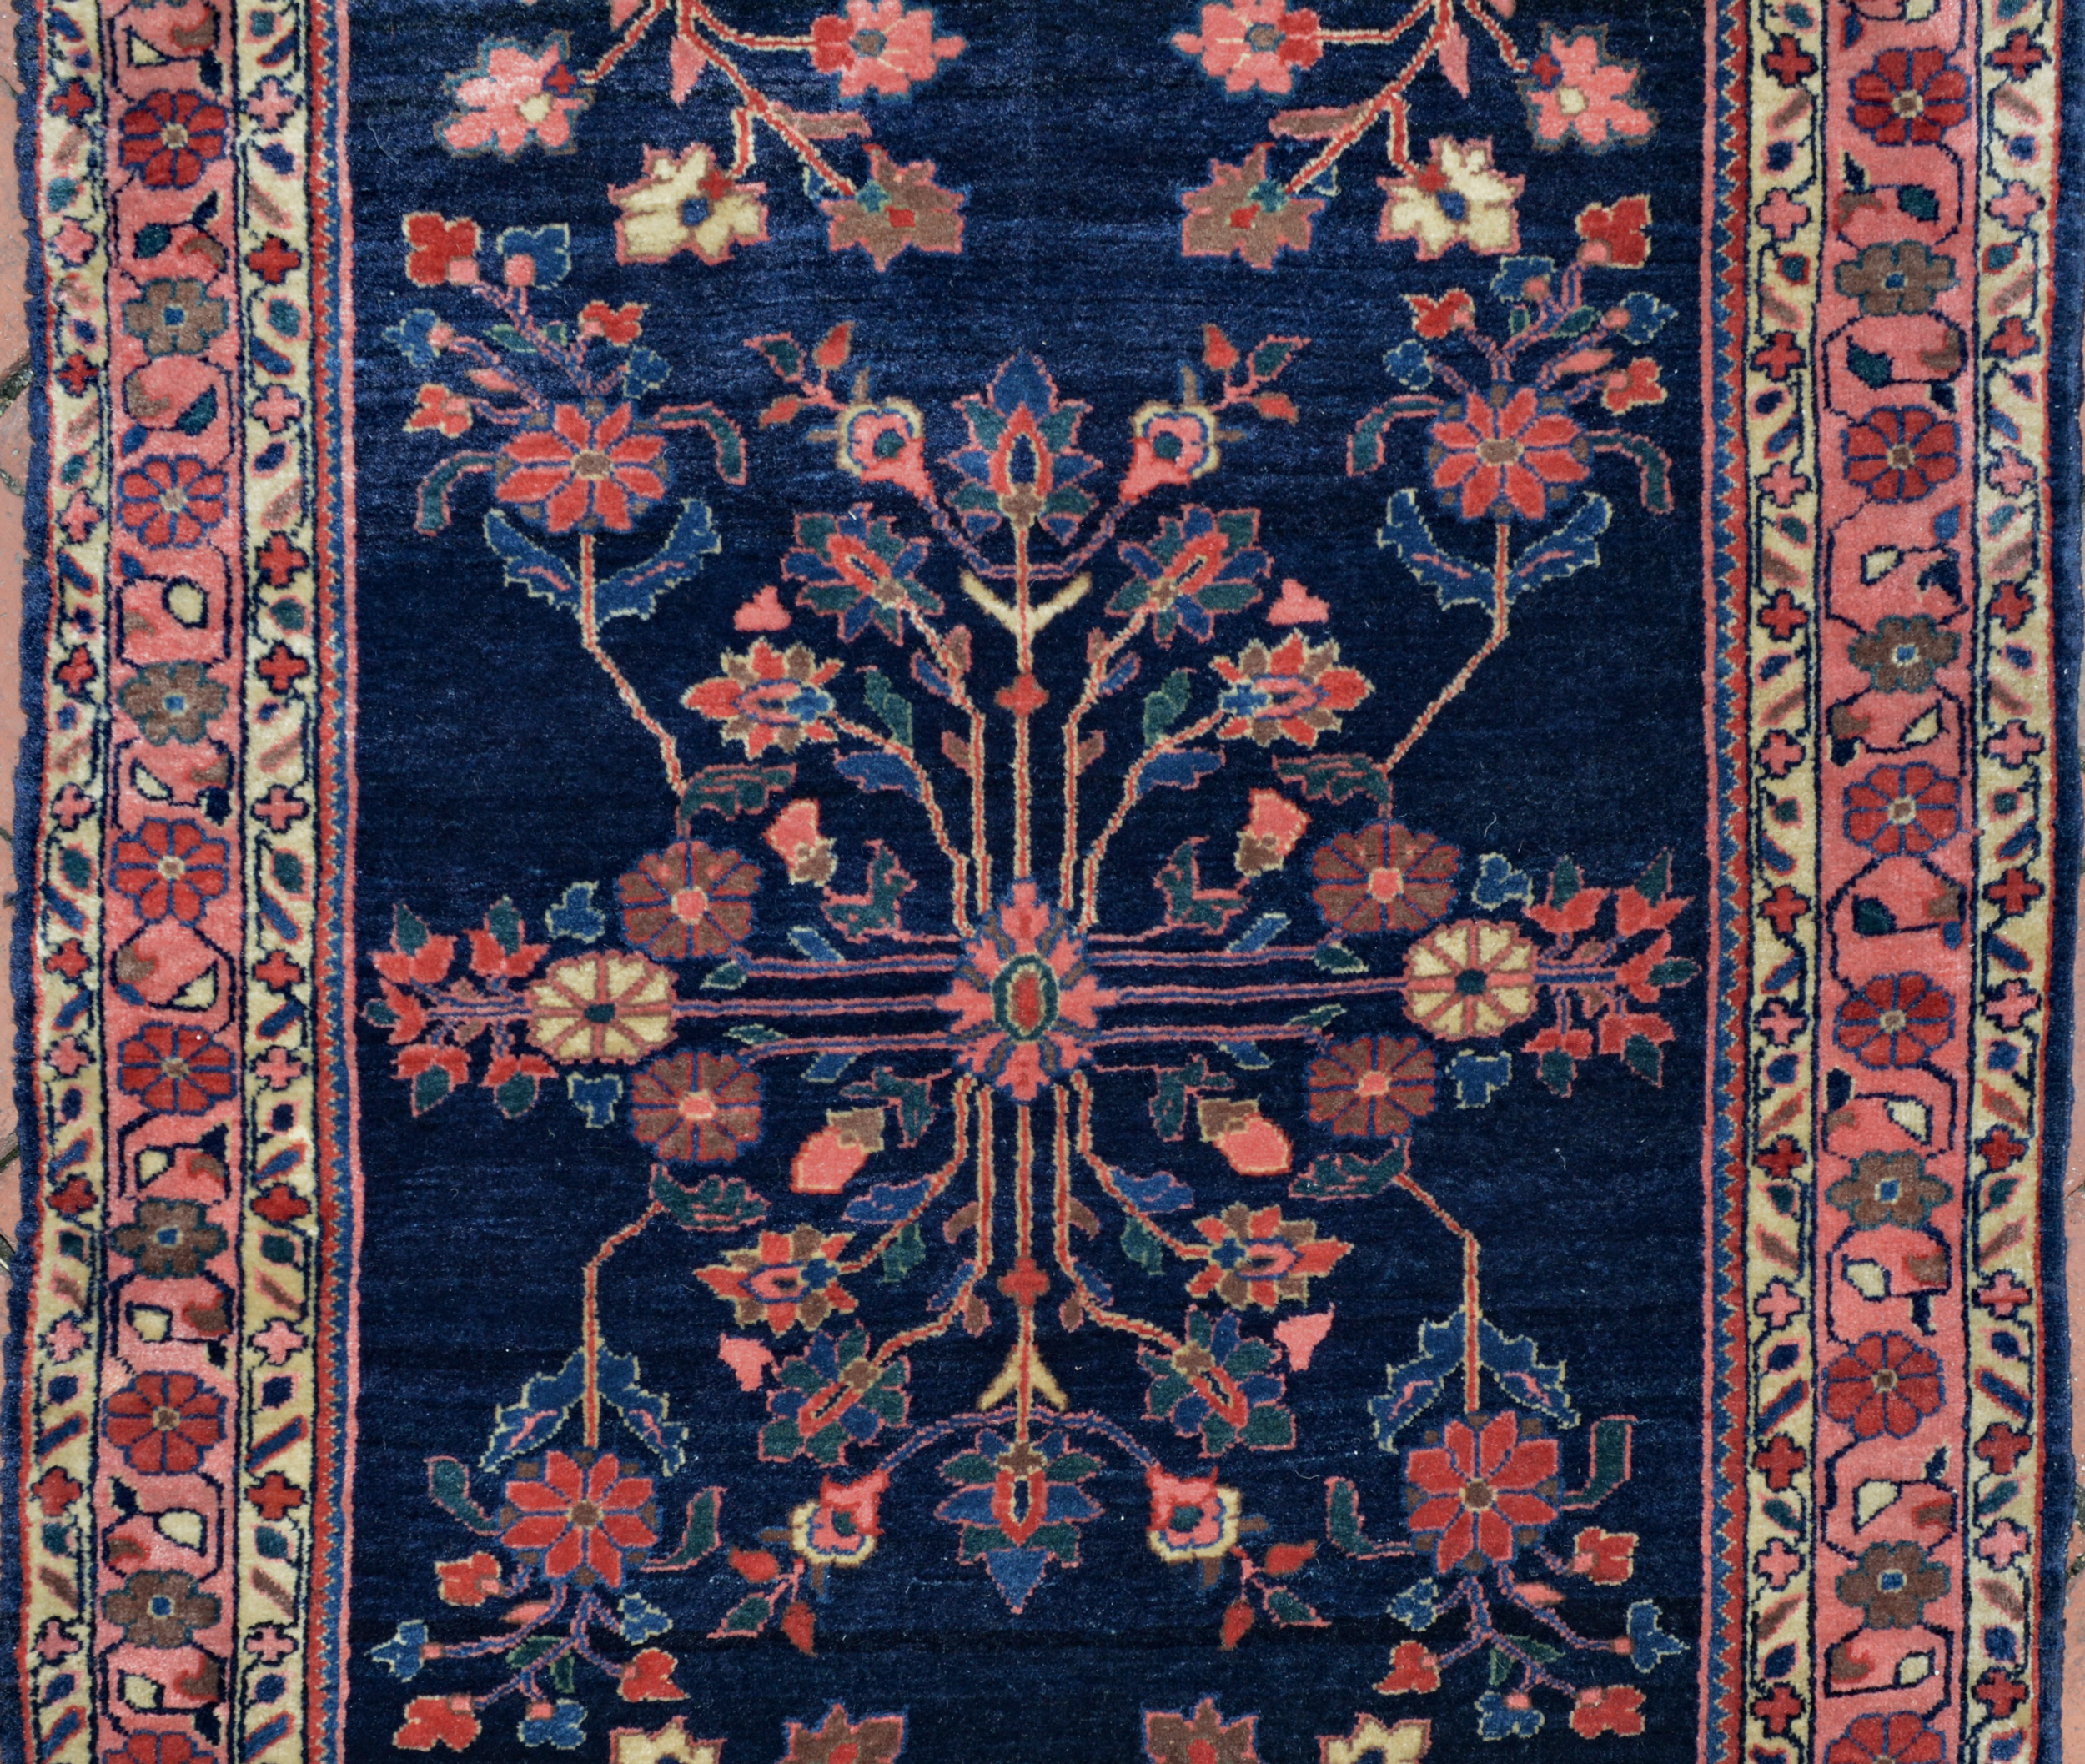 Field detail from a finely woven antique Persian Mahajaran Sarouk rug. The navy field is decorated with stylized floral forms and framed by a coral border with ivory guard borders. Douglas Stock Gallery is one of America's most selective dealers in antique Oriental rugs and specializes in antique Persian Fereghan Sarouk rugs and Mahajaran Sarouk rugs.